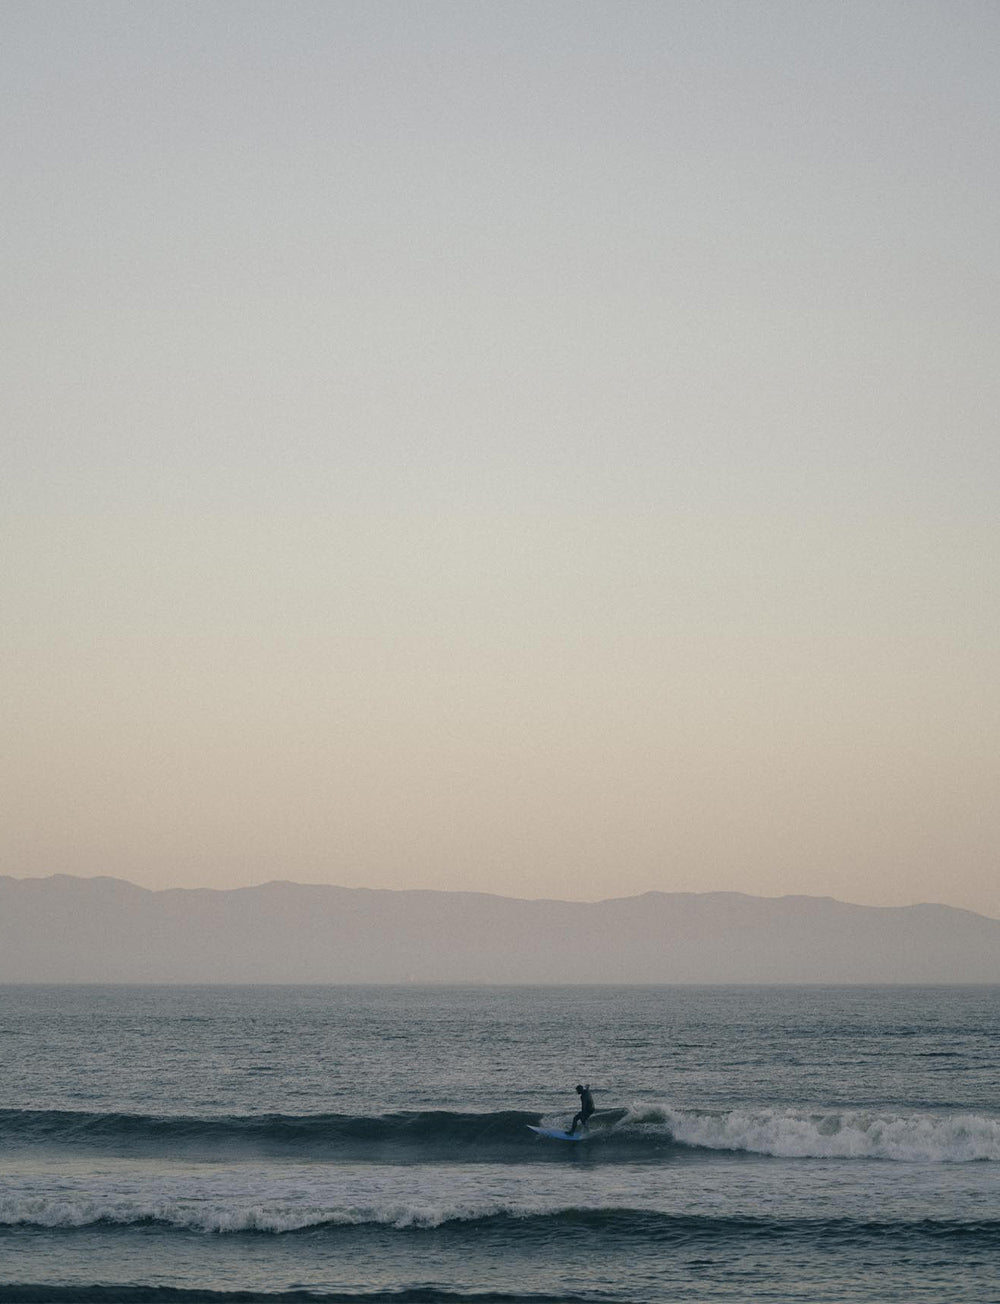 A lone surfer rides the last wave of the day with a hazy dusk horizon in the background